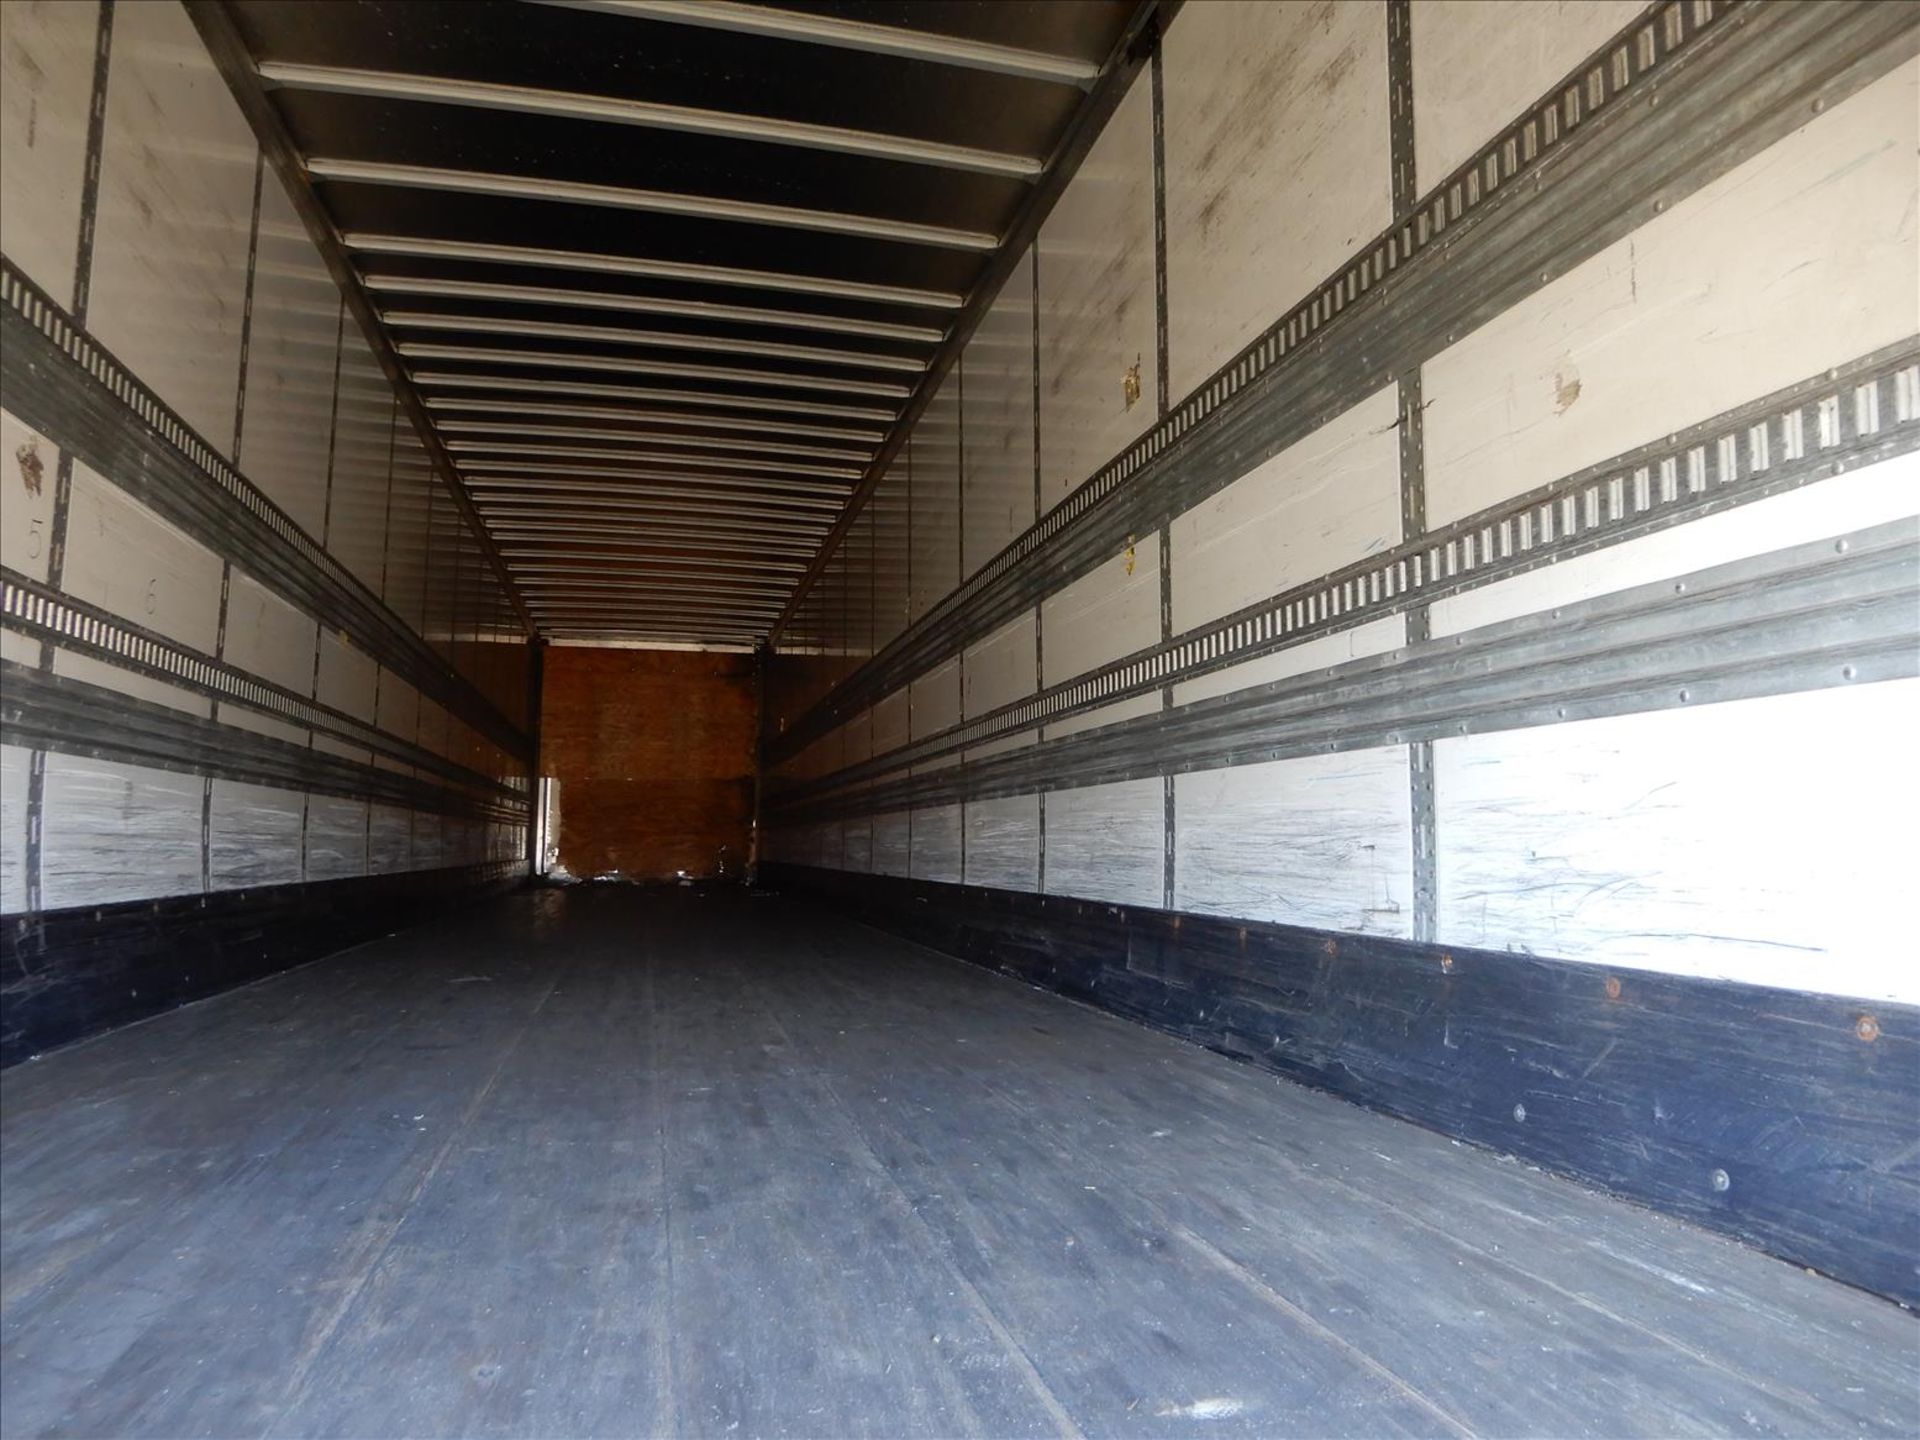 2012 Stoughton Trailer - Located in Indianapolis, IN - Image 13 of 20